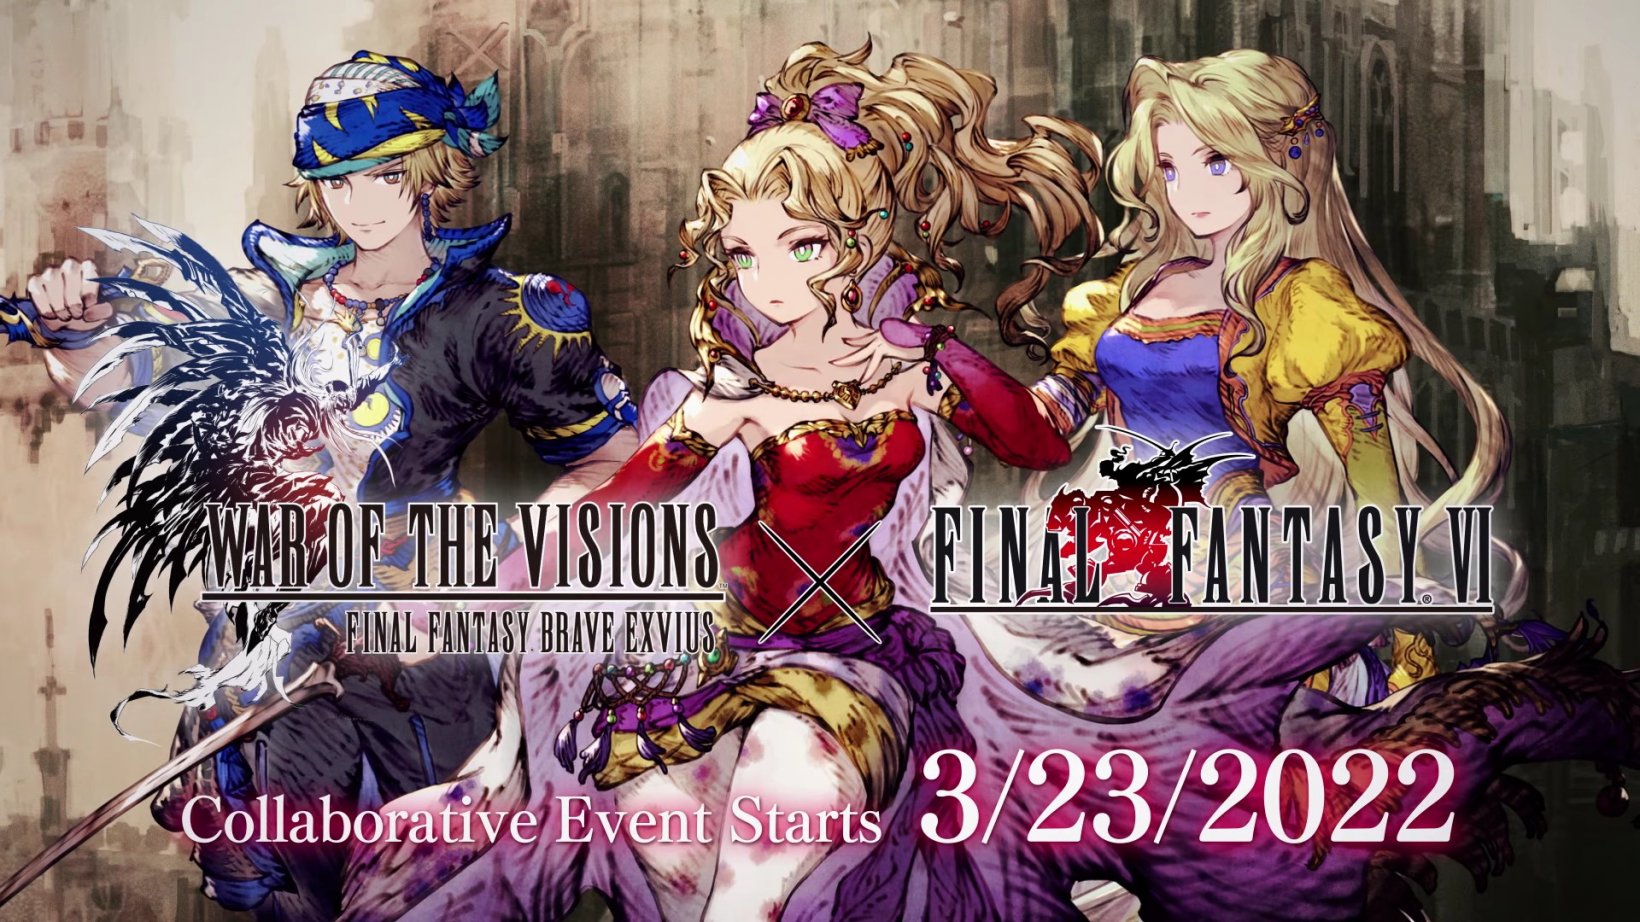 War of the Visions Final Fantasy Brave Exvius is collaborating with Final Fantasy VII for a nostalgic event filled with new units and rewards